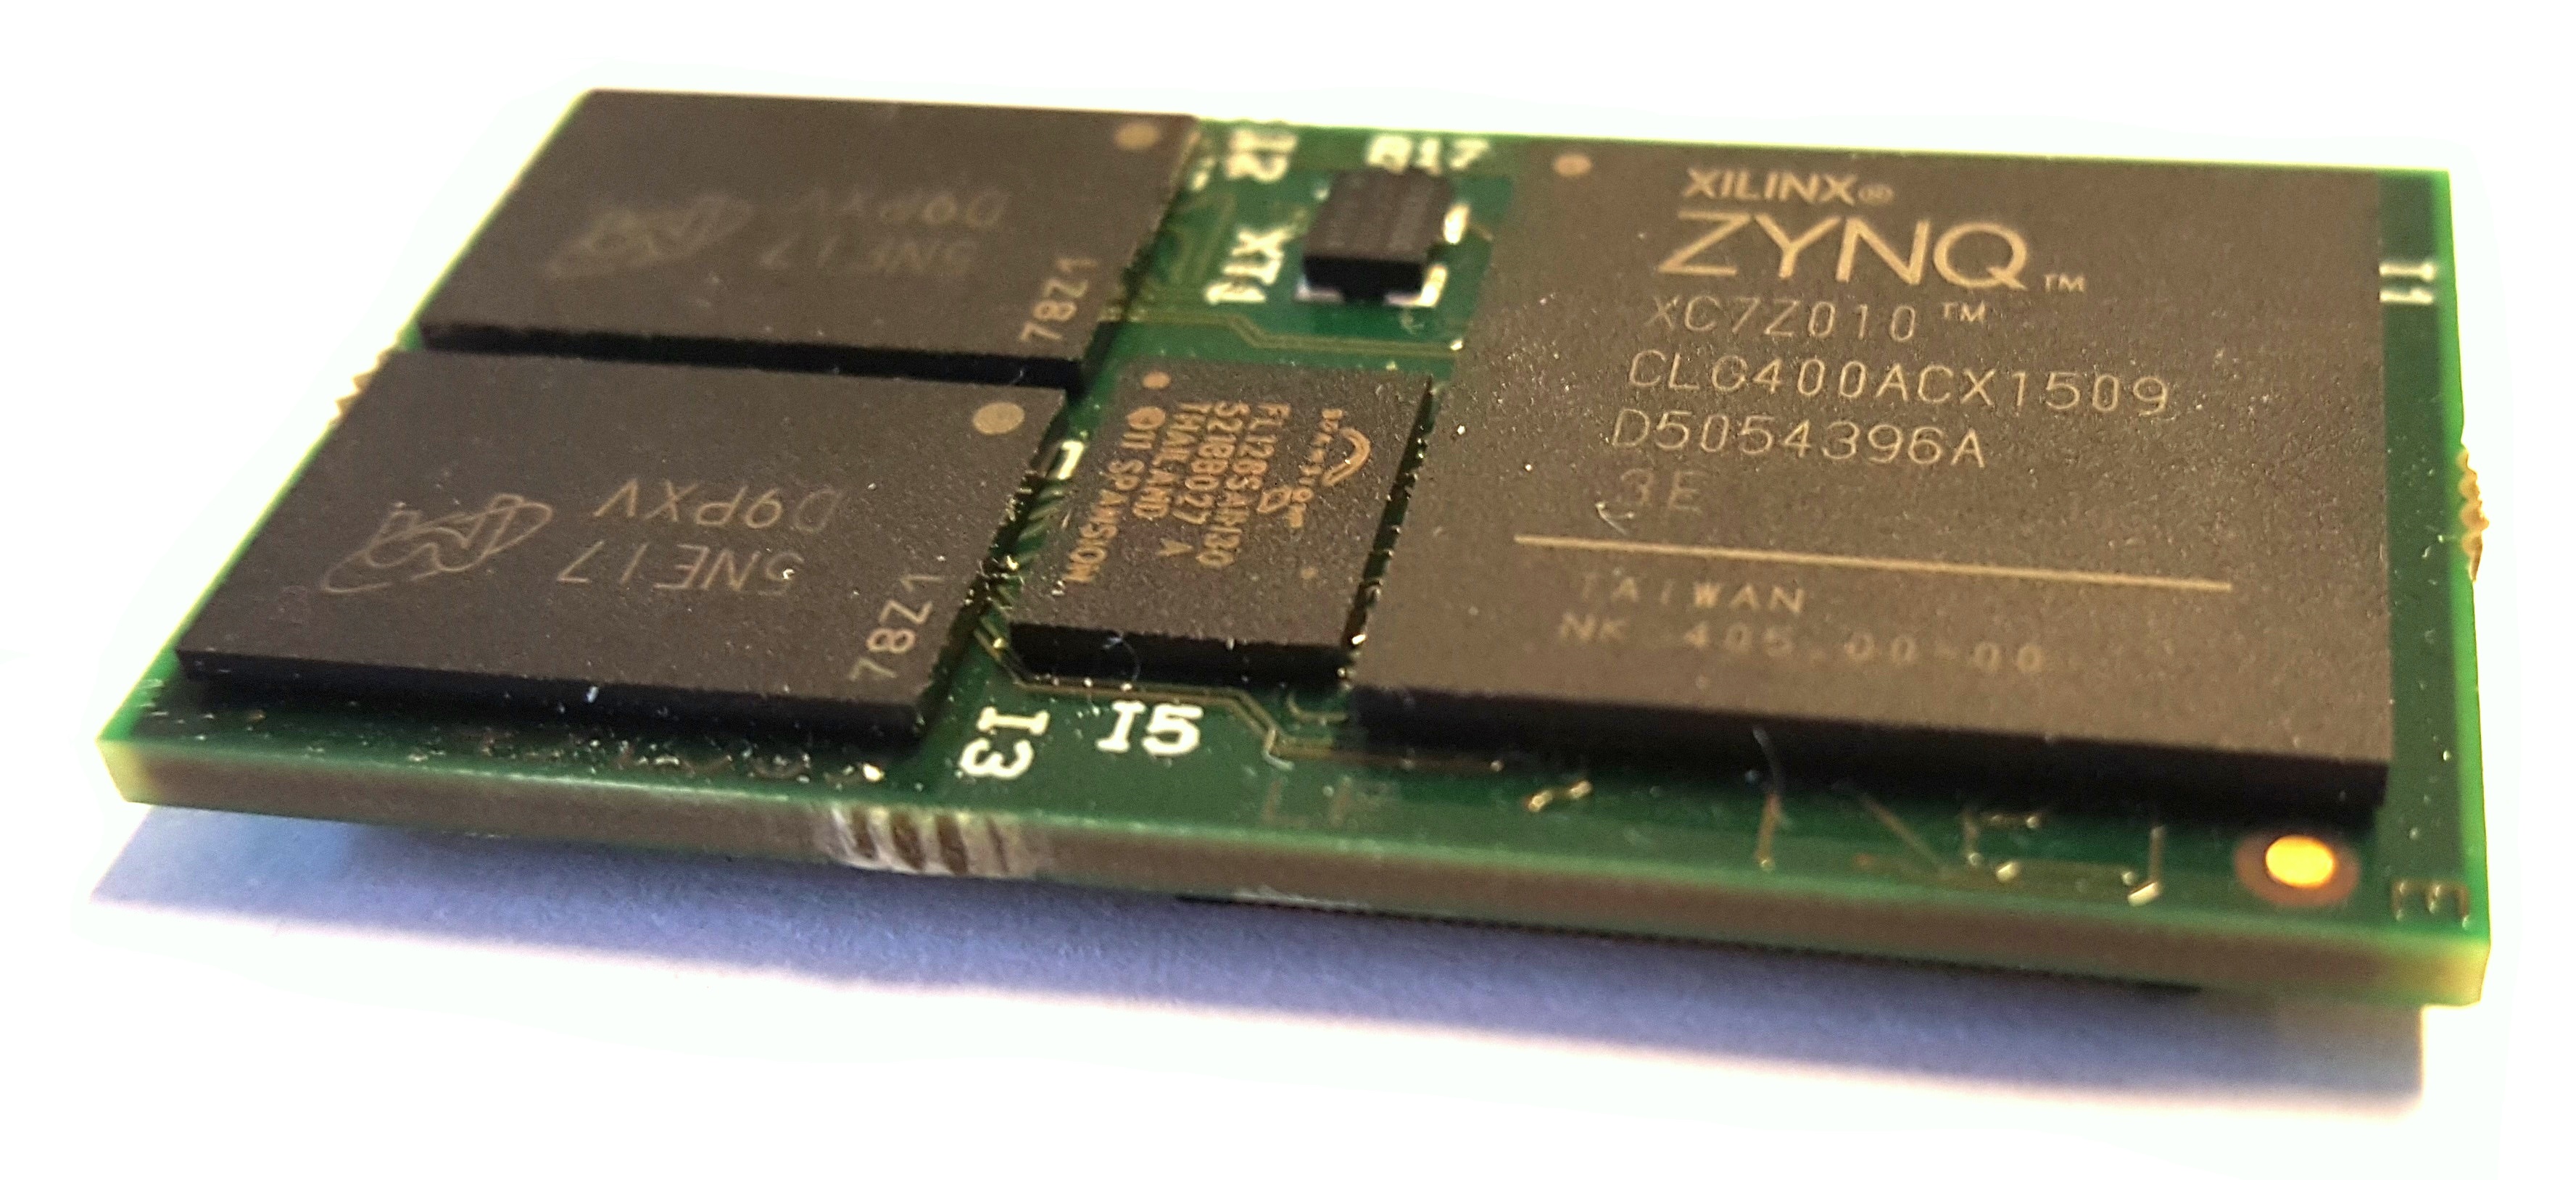 ZynqBoard: The World's Smallest Zynq SoM